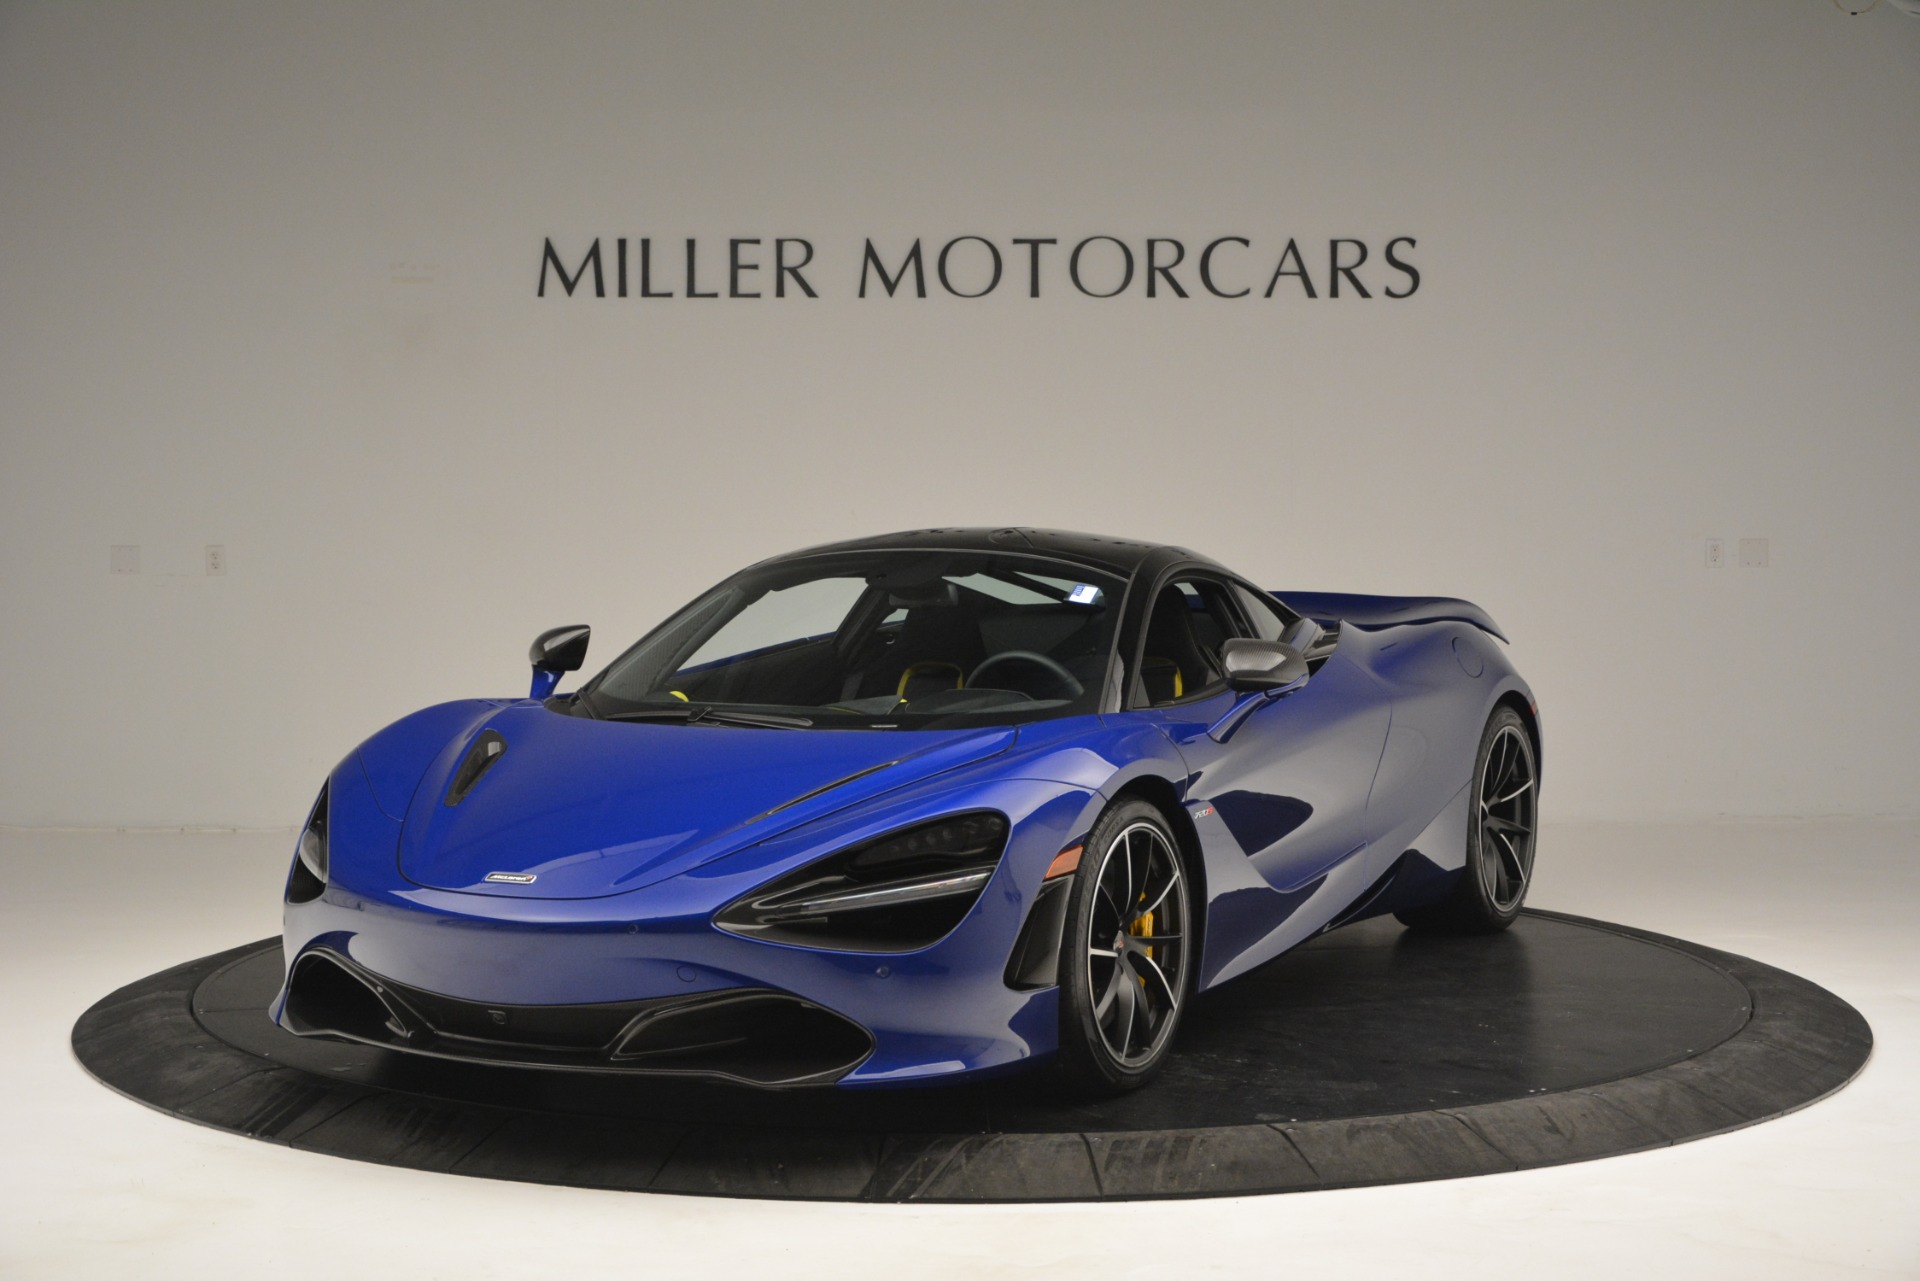 Used 2018 McLaren 720S Performance for sale Sold at Bugatti of Greenwich in Greenwich CT 06830 1